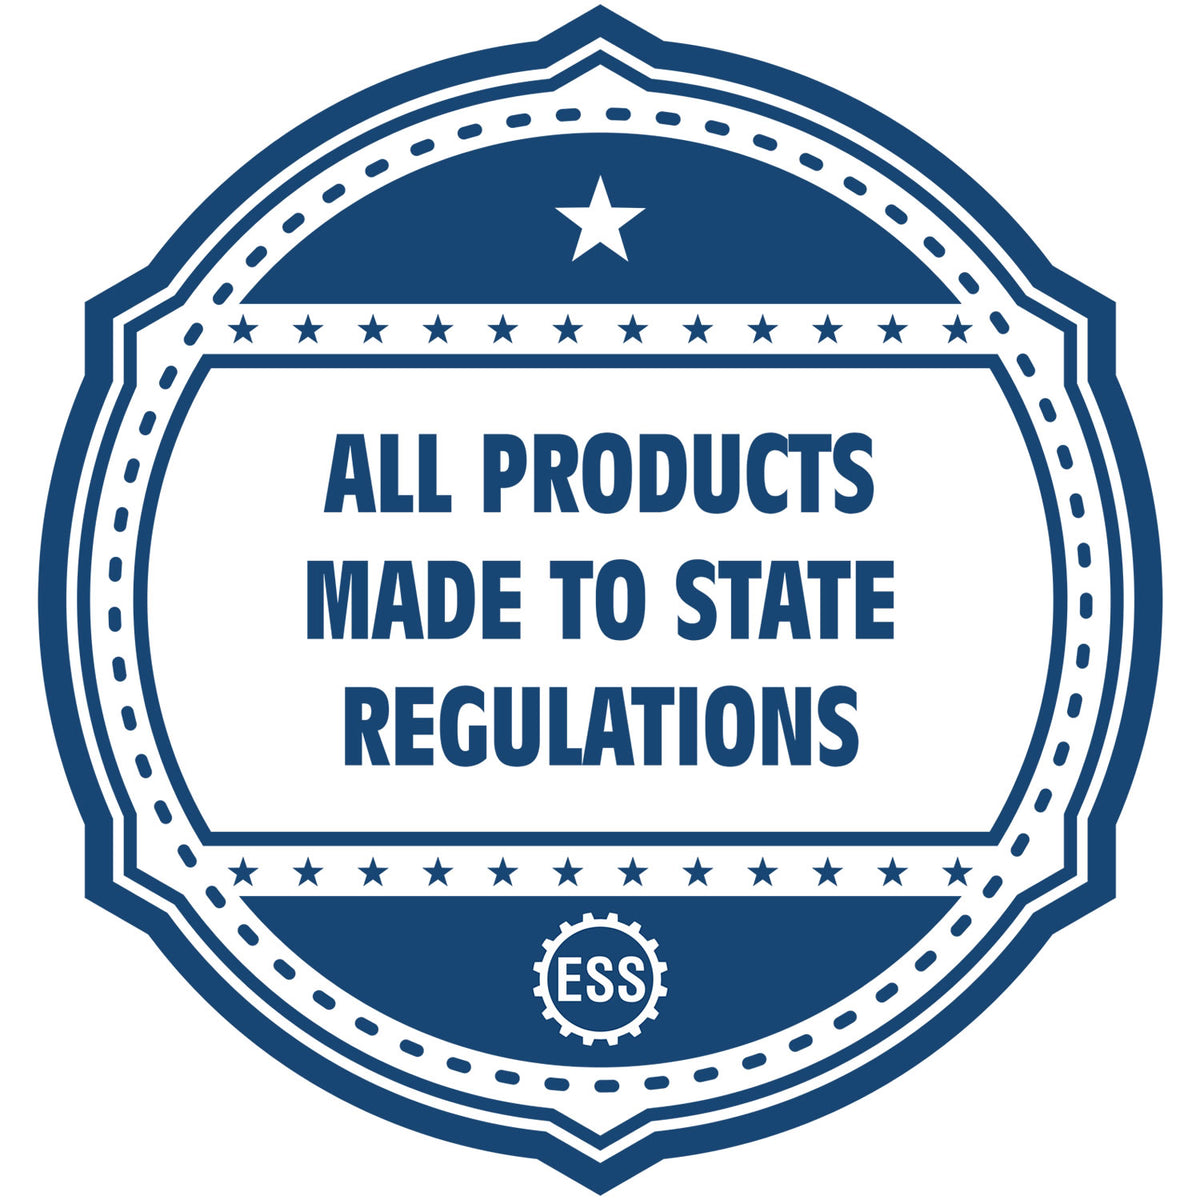 An icon or badge element for the Extended Long Reach Missouri Architect Seal Embosser showing that this product is made in compliance with state regulations.